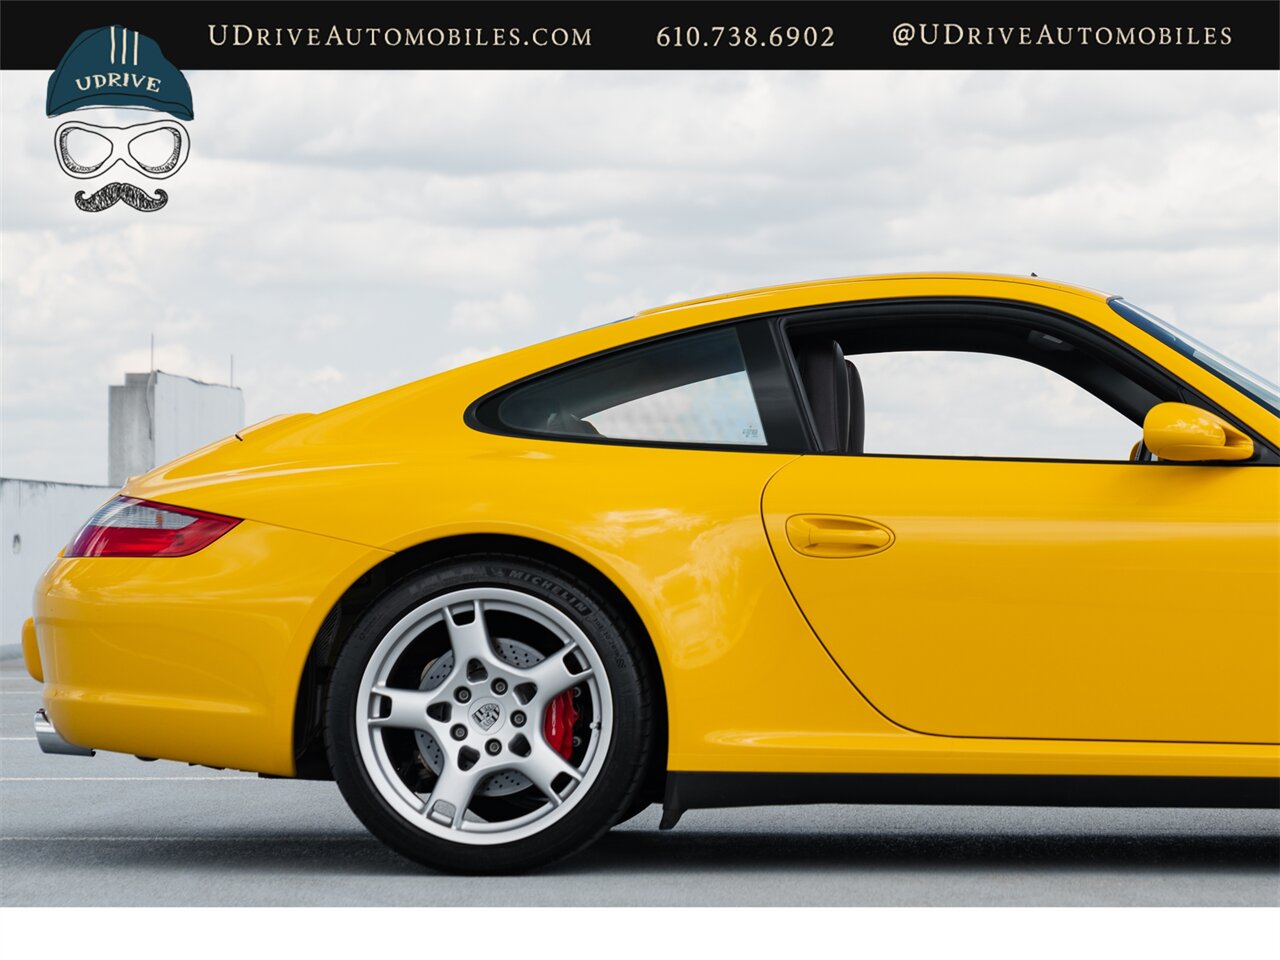 2006 Porsche 911 Carrera 4S  997 C4S 6 Speed Cocoa Full Lthr Chrono Sport Exhaust Special Color Combo - Photo 18 - West Chester, PA 19382